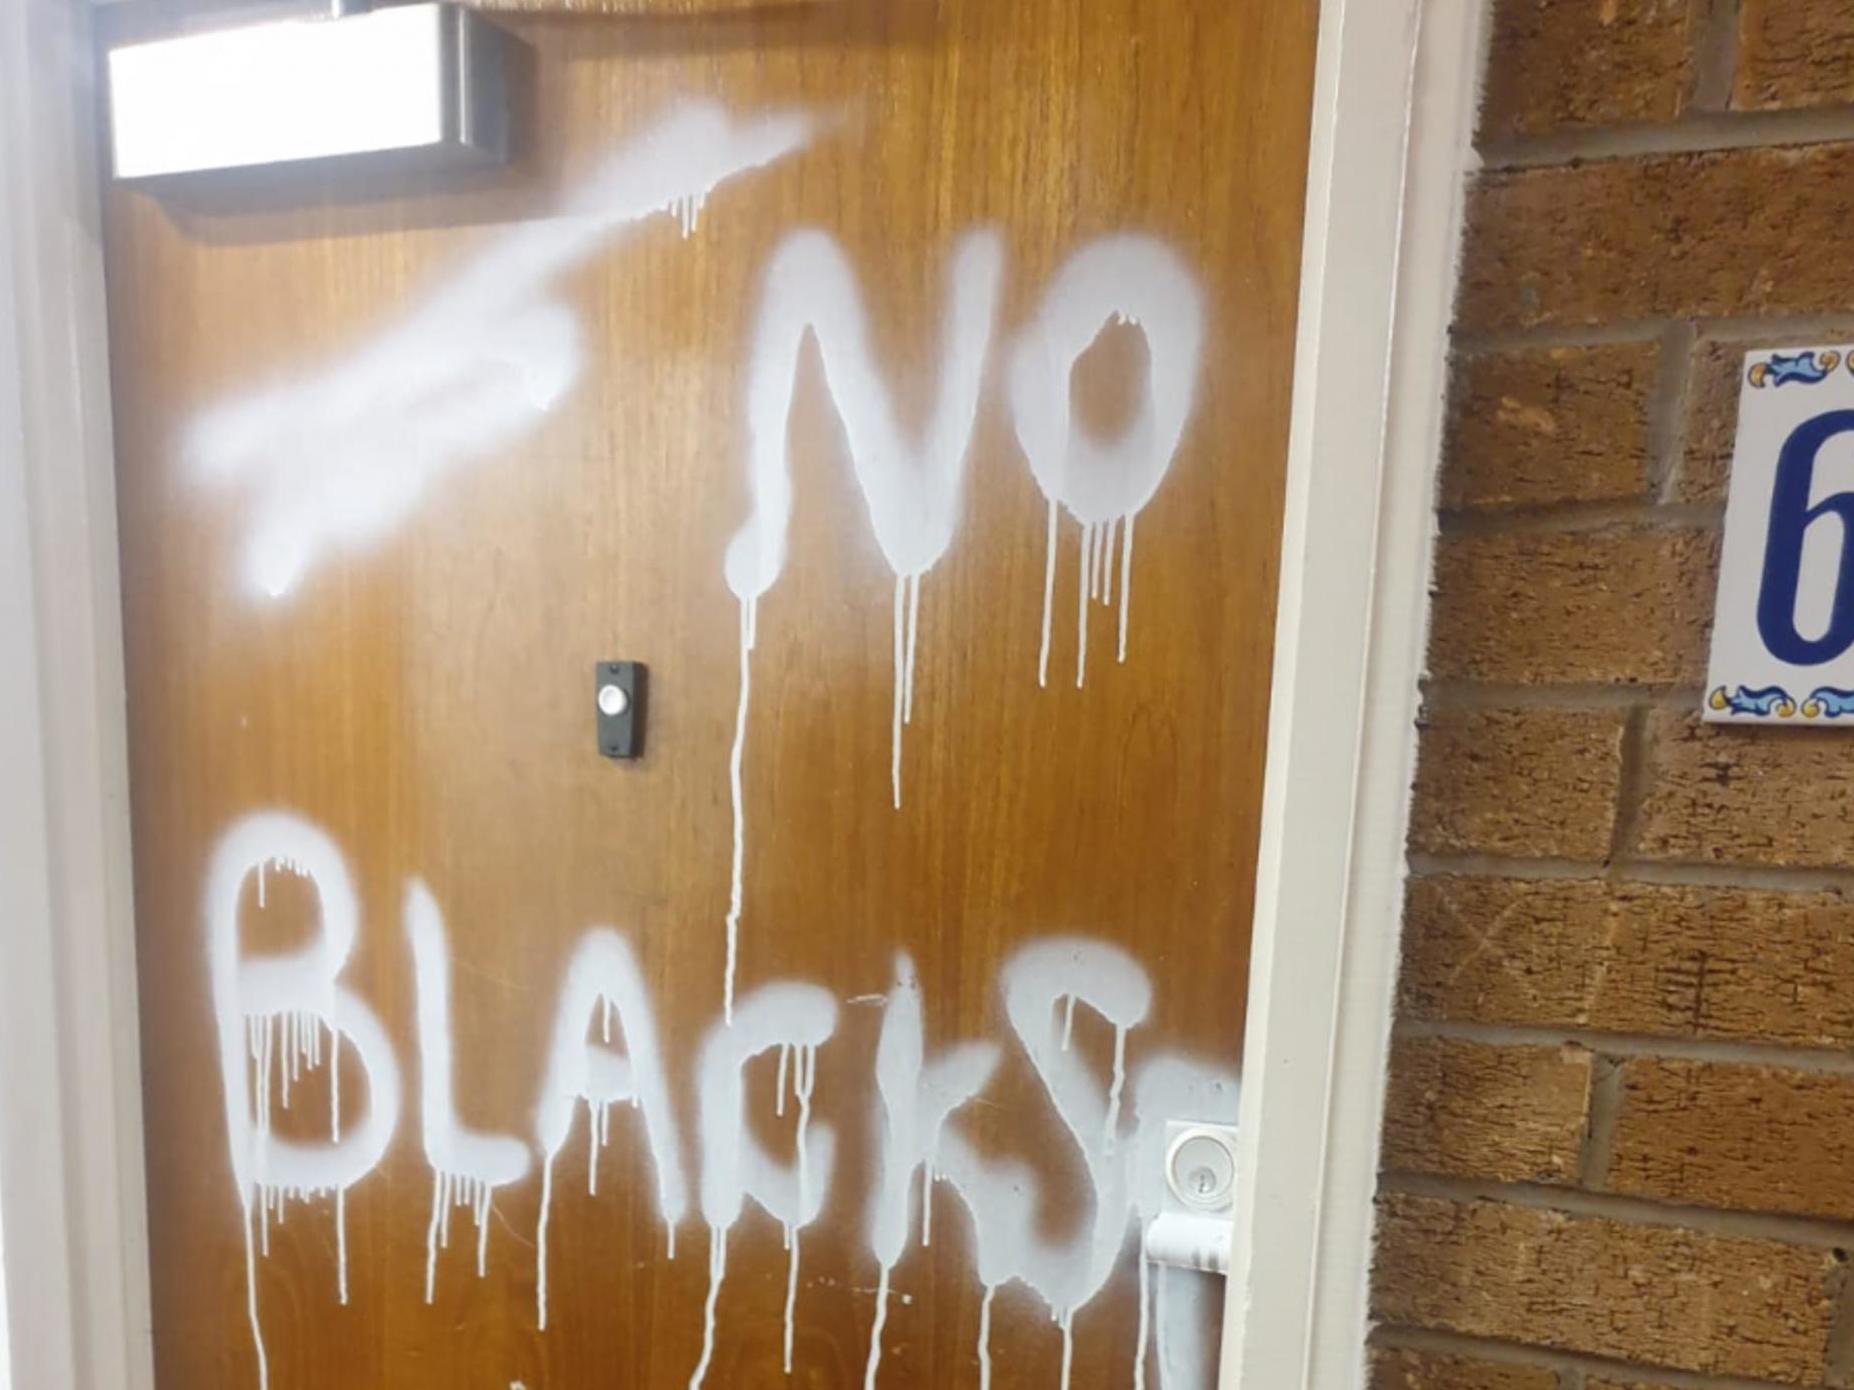 The racist message was daubed on Jackson Yamba's front door five days after they moved into the flat in Salford